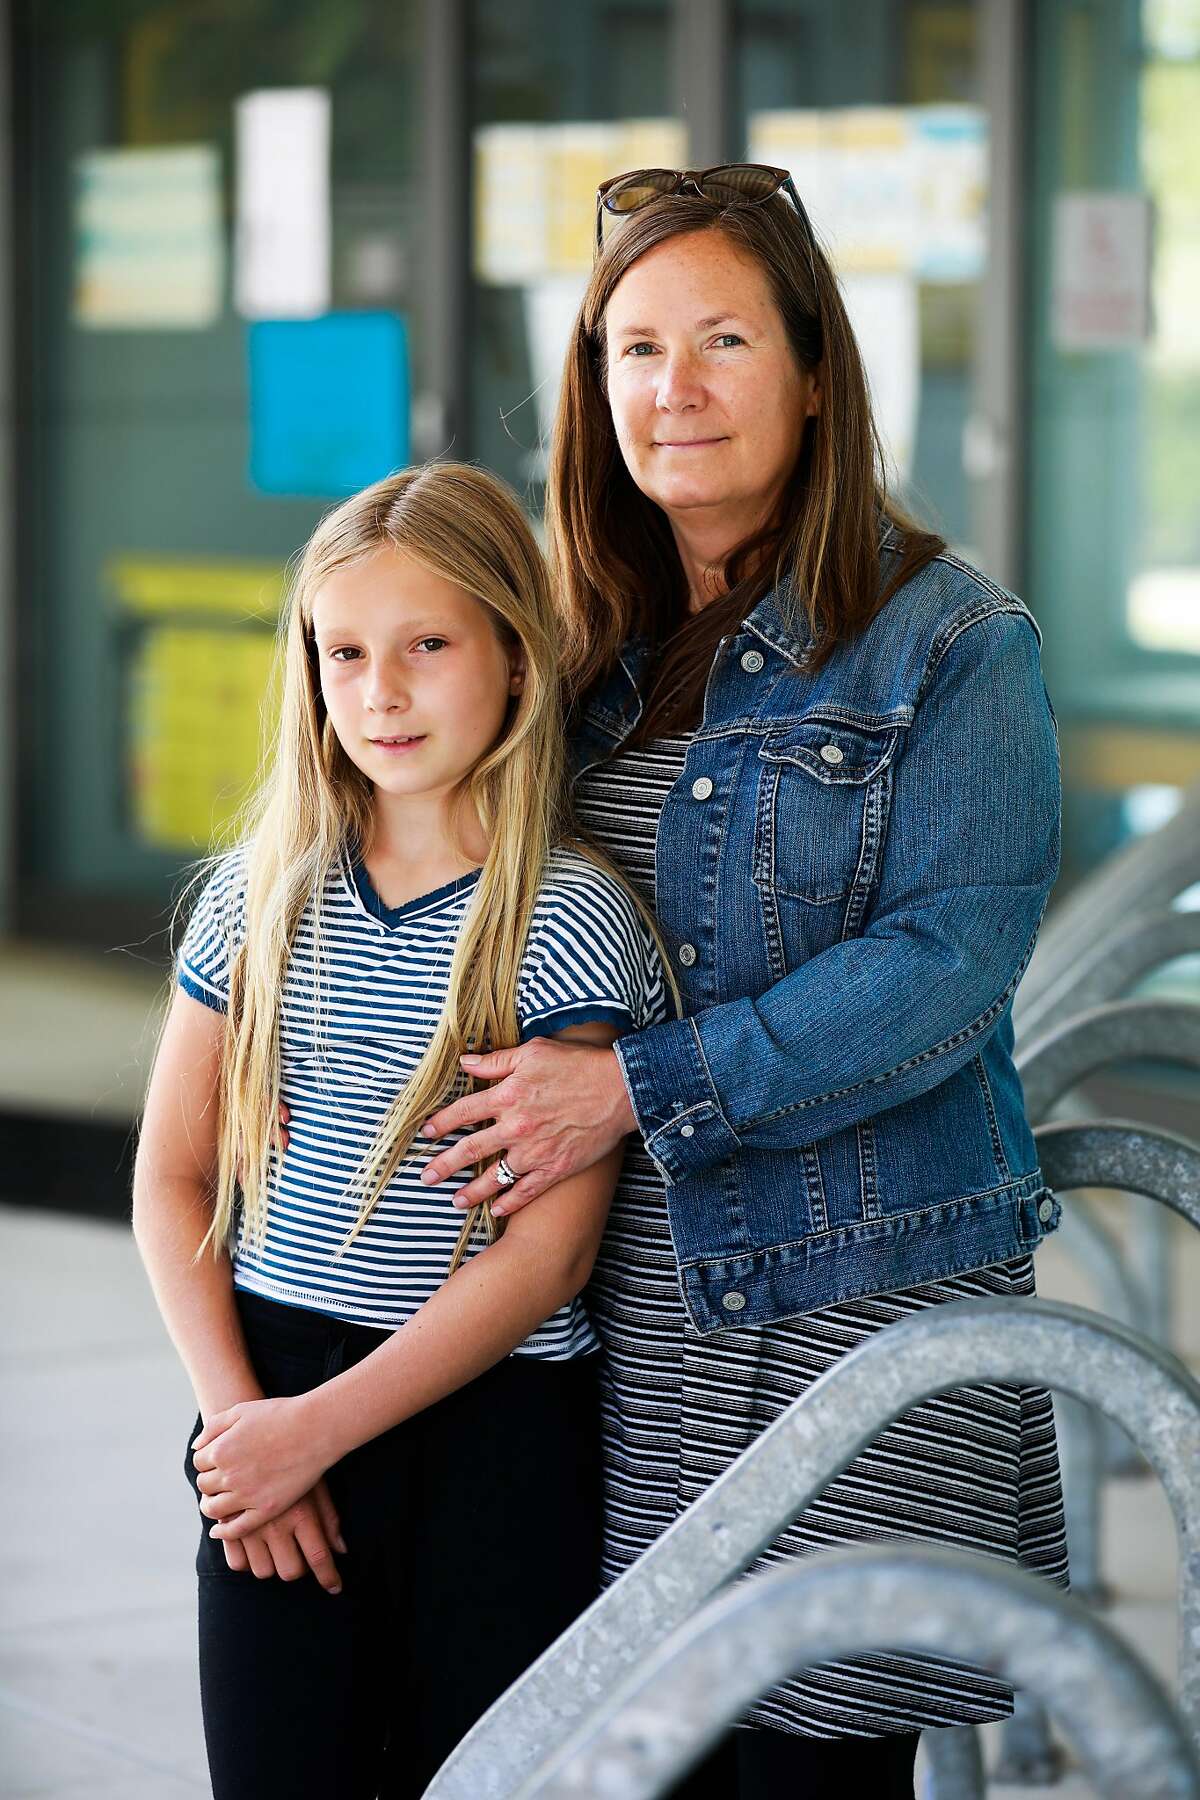 (L-r) Brooklynn Conway, 10 and her mother Jennifer Conway stand outside Bayside Martin Luther King Jr. Academy where she will be going to school in Marin City, California on Friday, June 11, 2021.